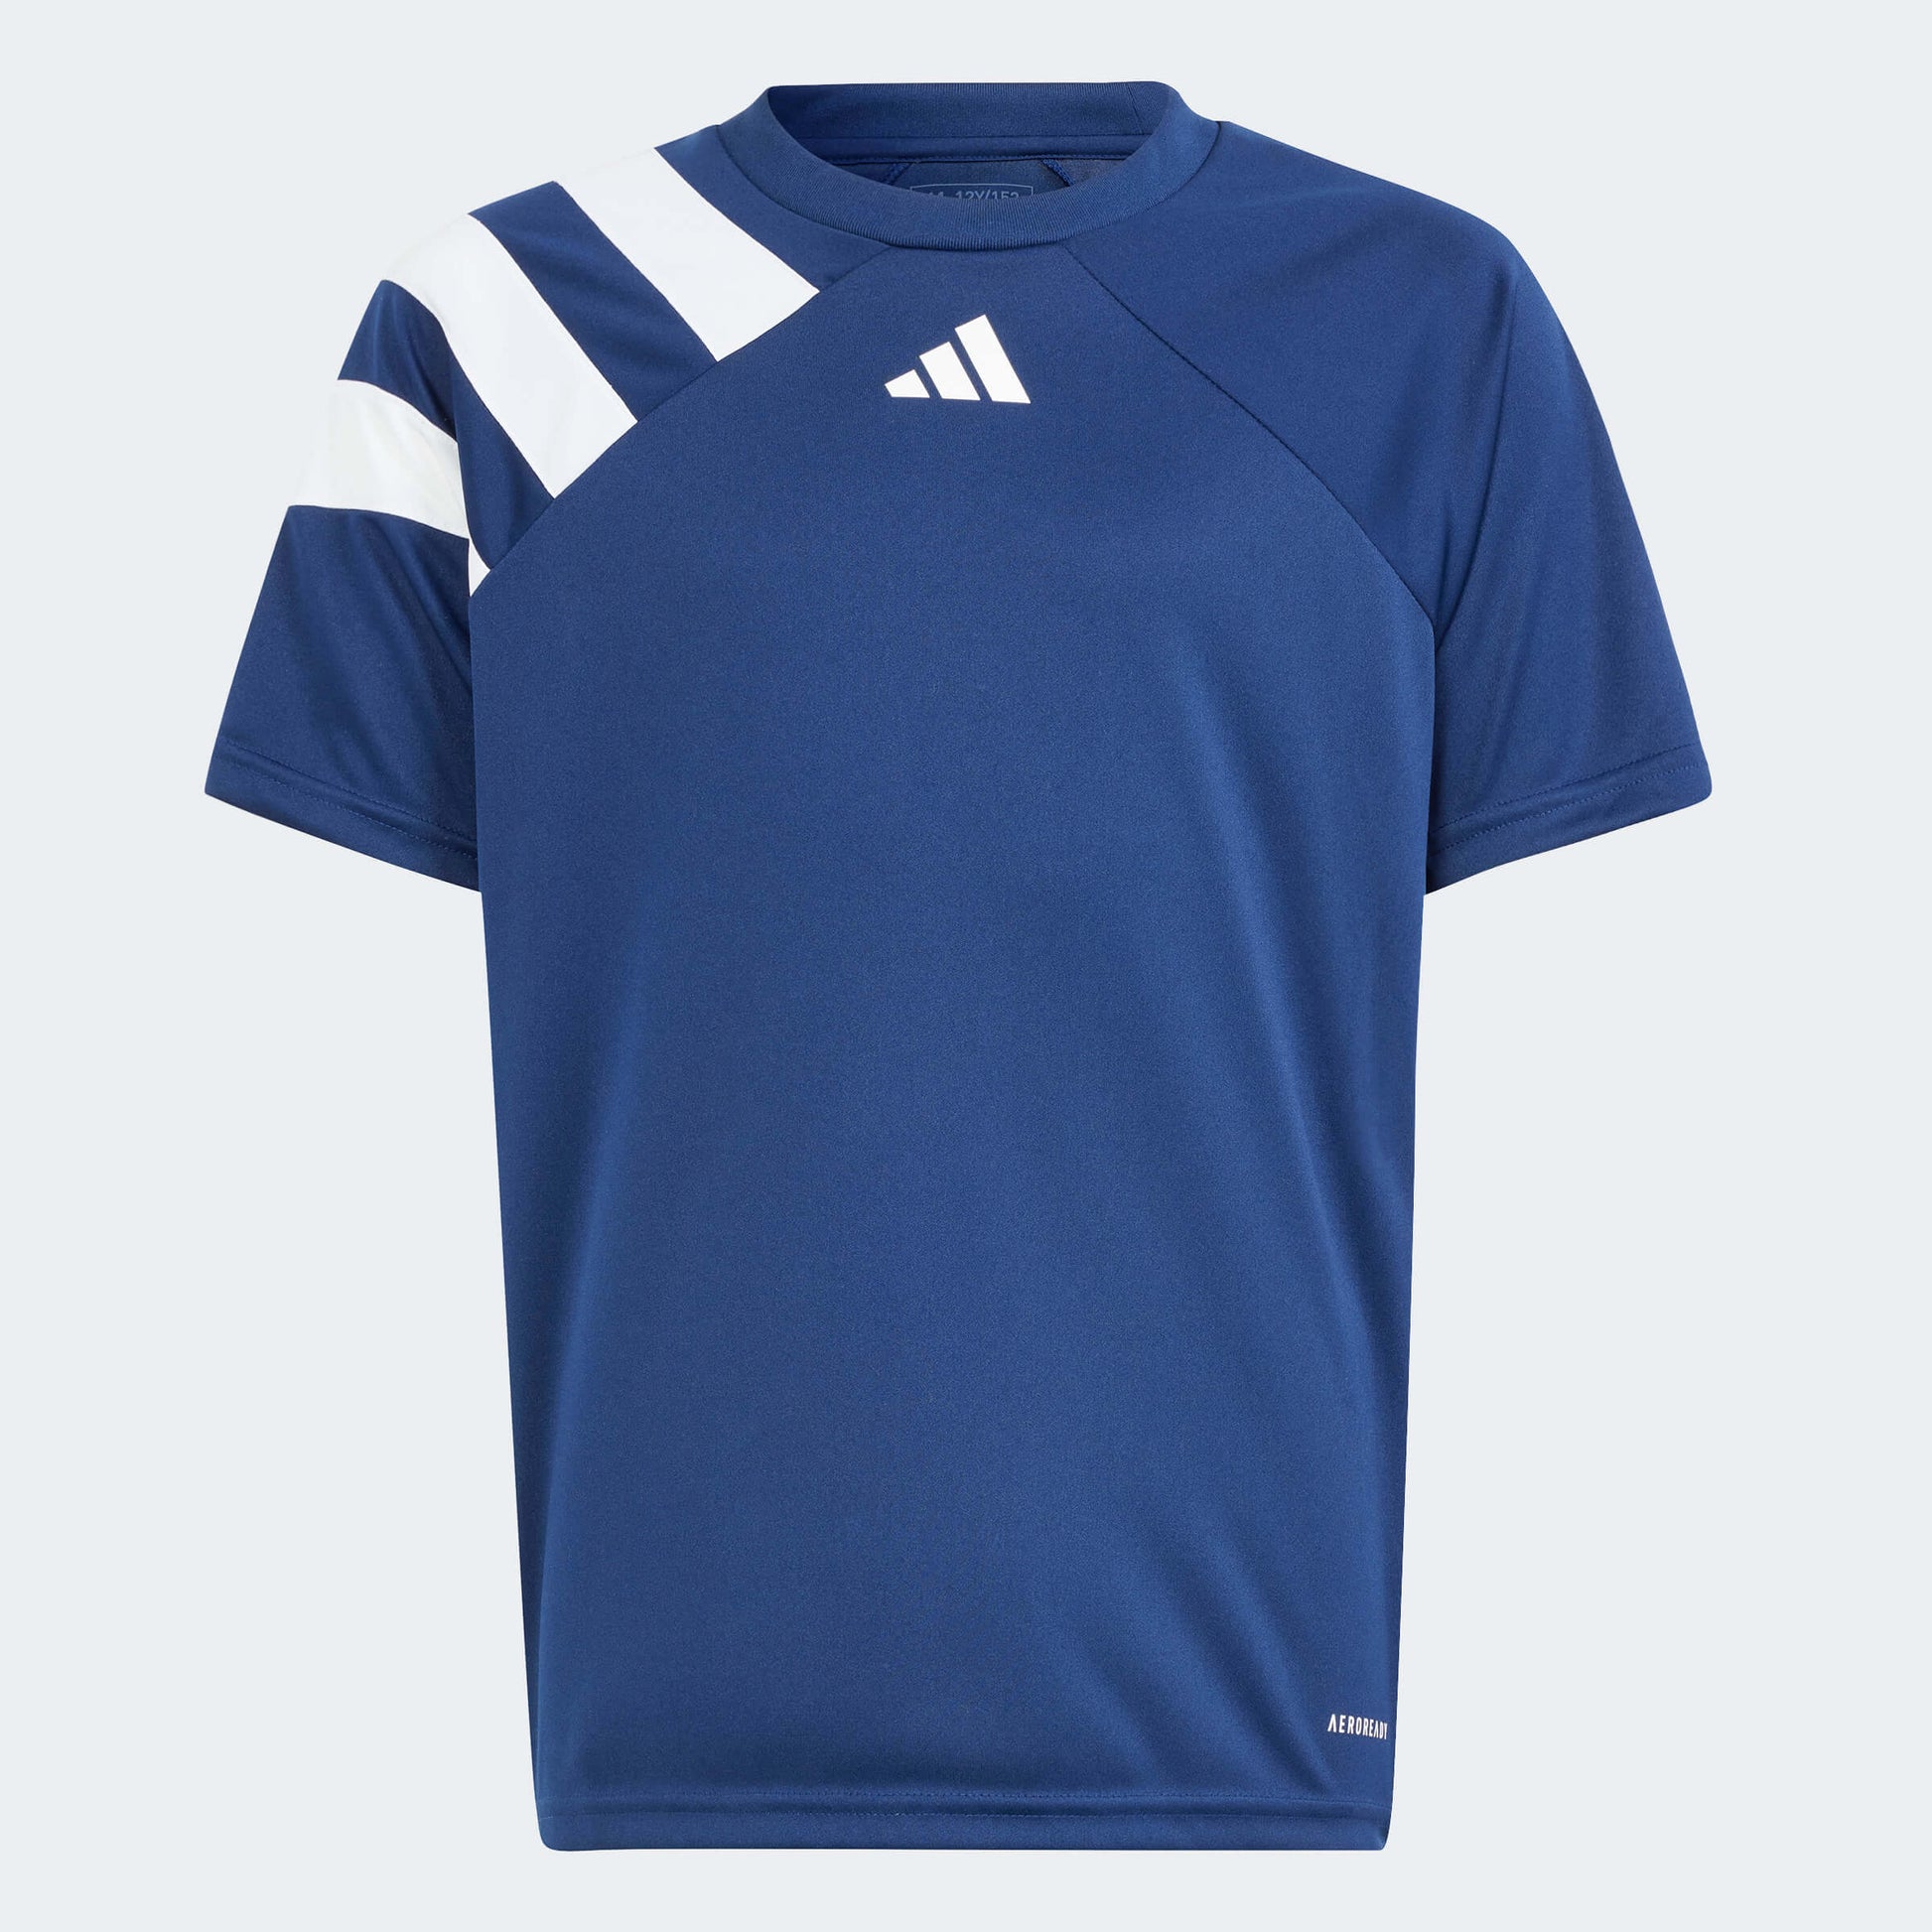 adidas YOUTH Fortore 23 Jersey Team Navy Blue 2-White (Front)